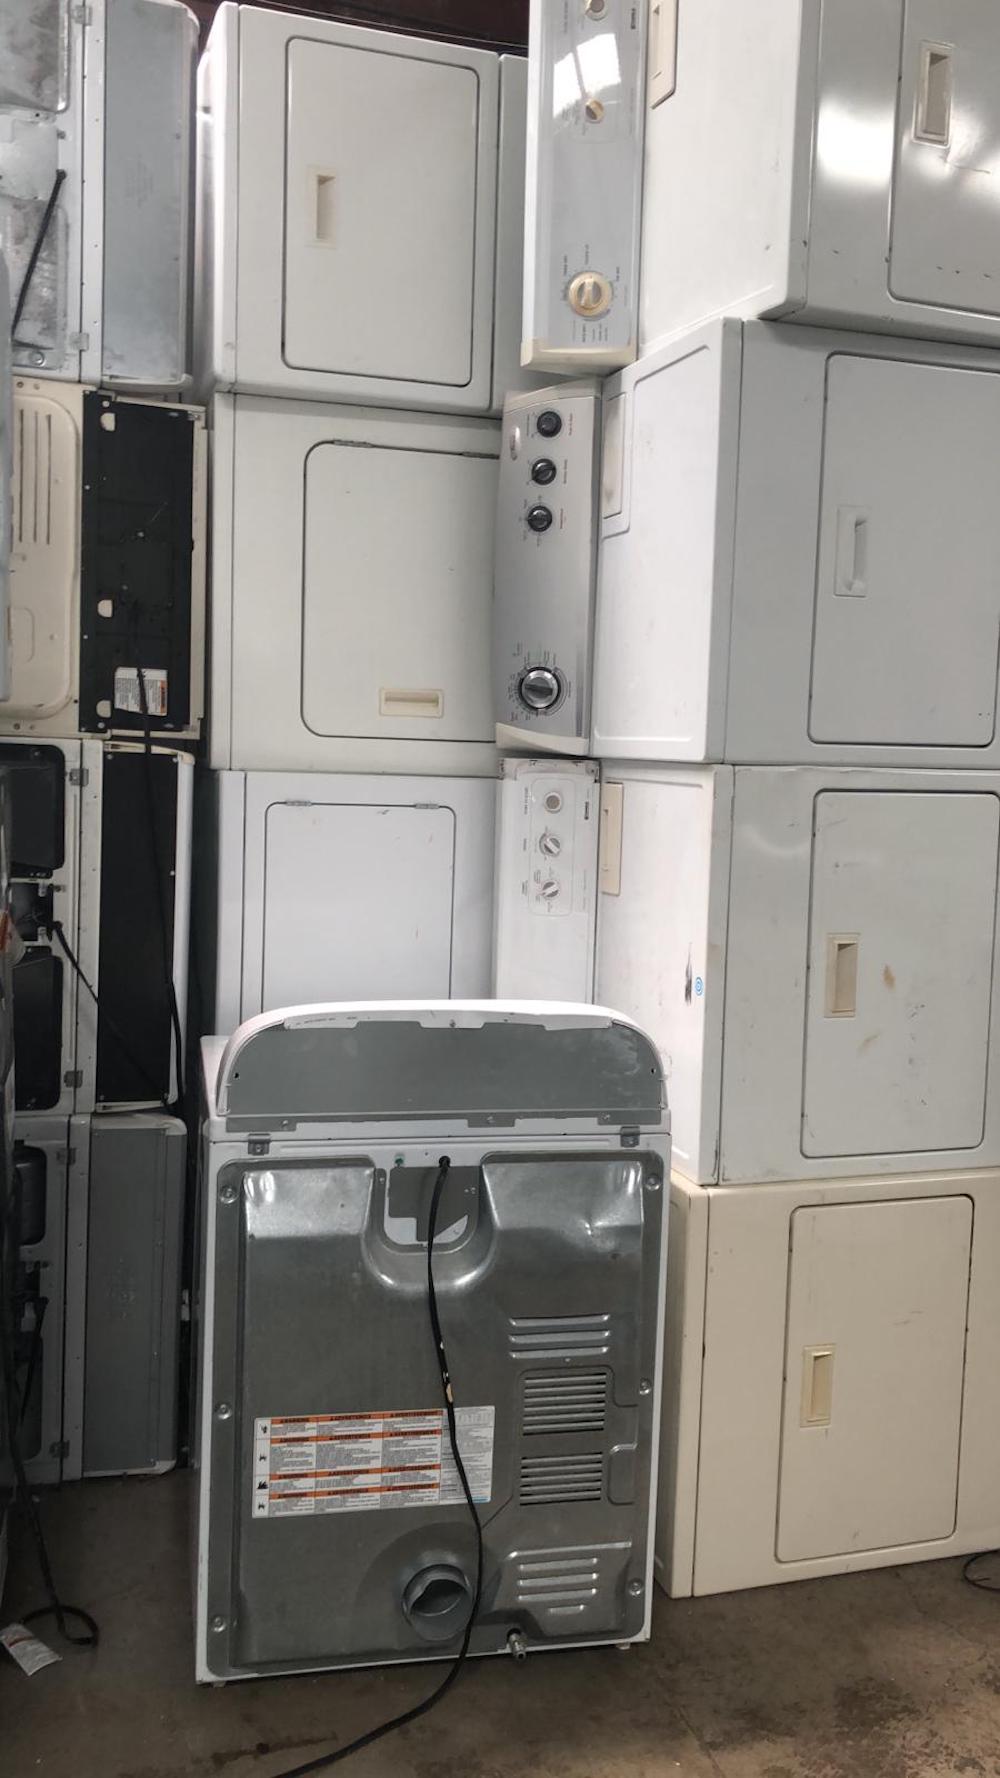 example pictures of Used Whirlpool, Kenmore and Maytag gas and electric dryers for sale in bulk or individually (10 item minimum).